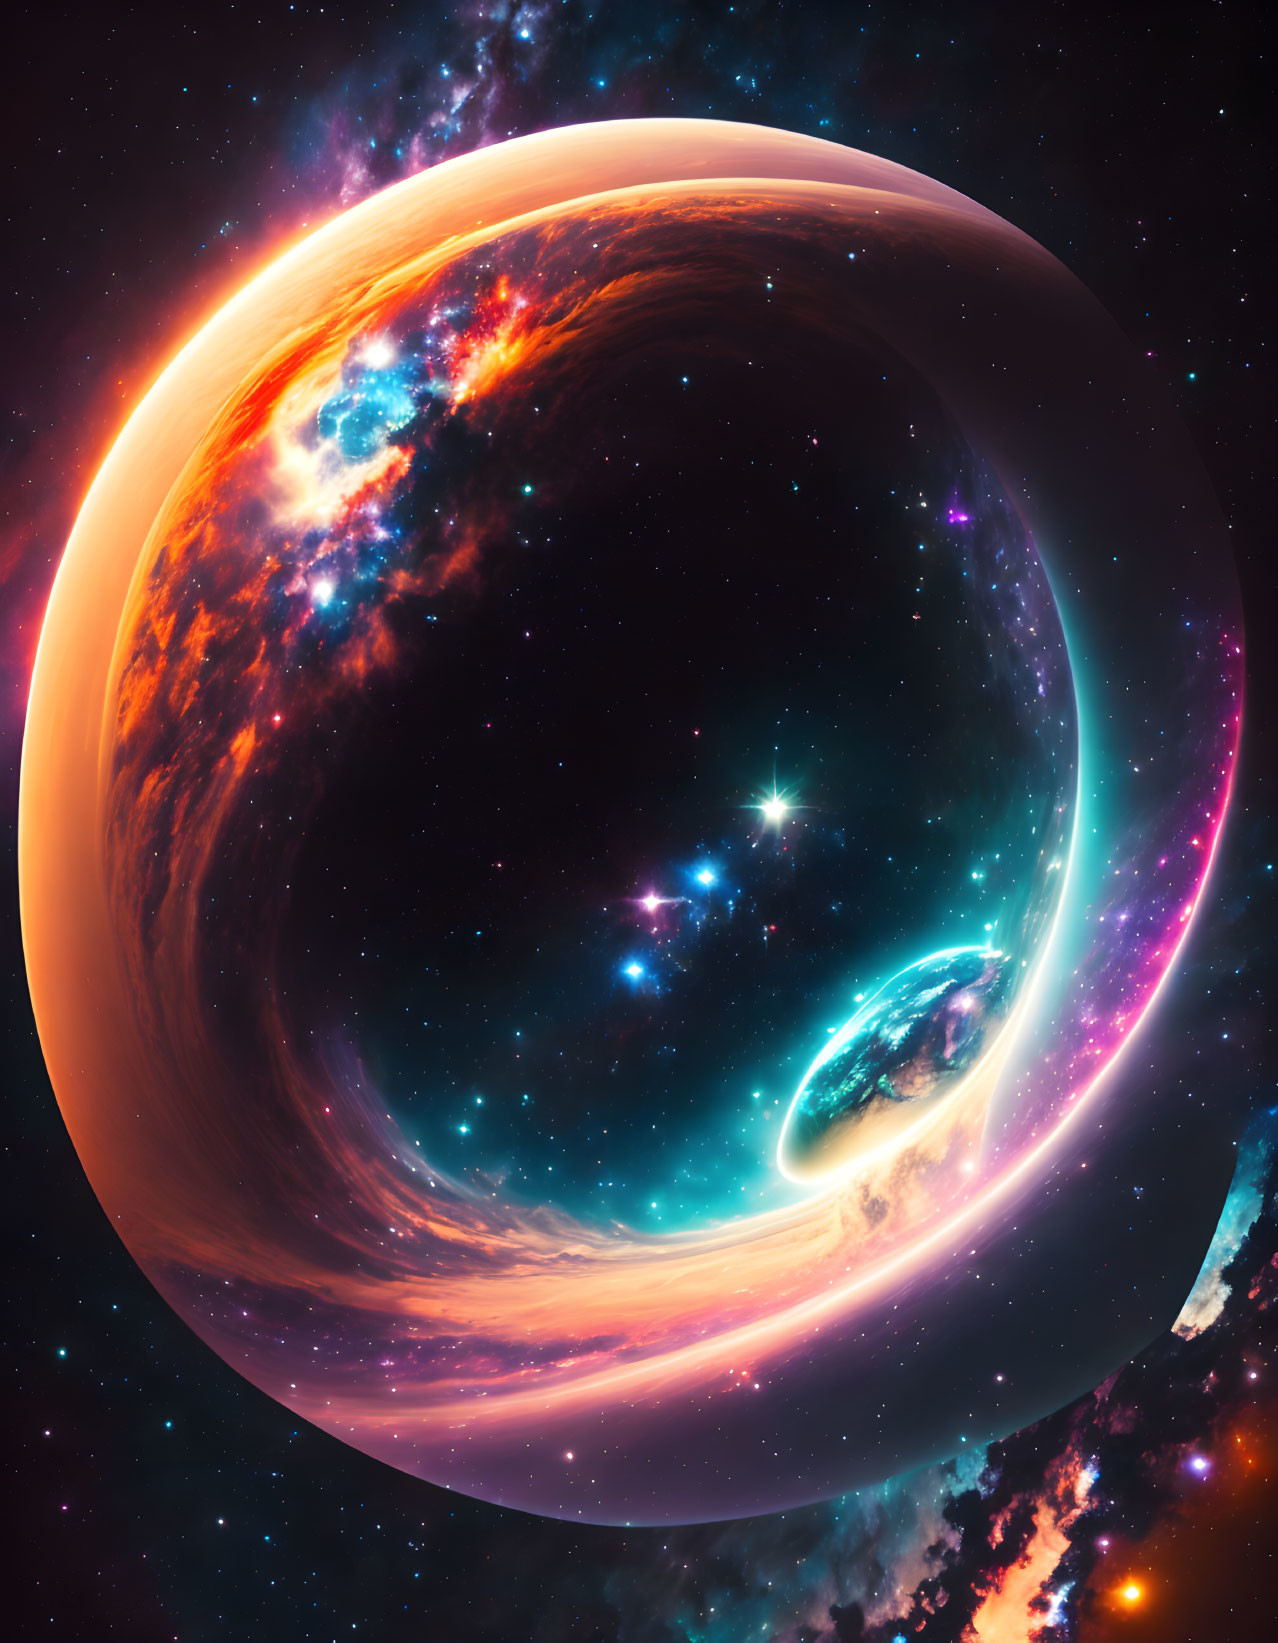 Vibrant cosmic scene with swirling galaxy and celestial bodies